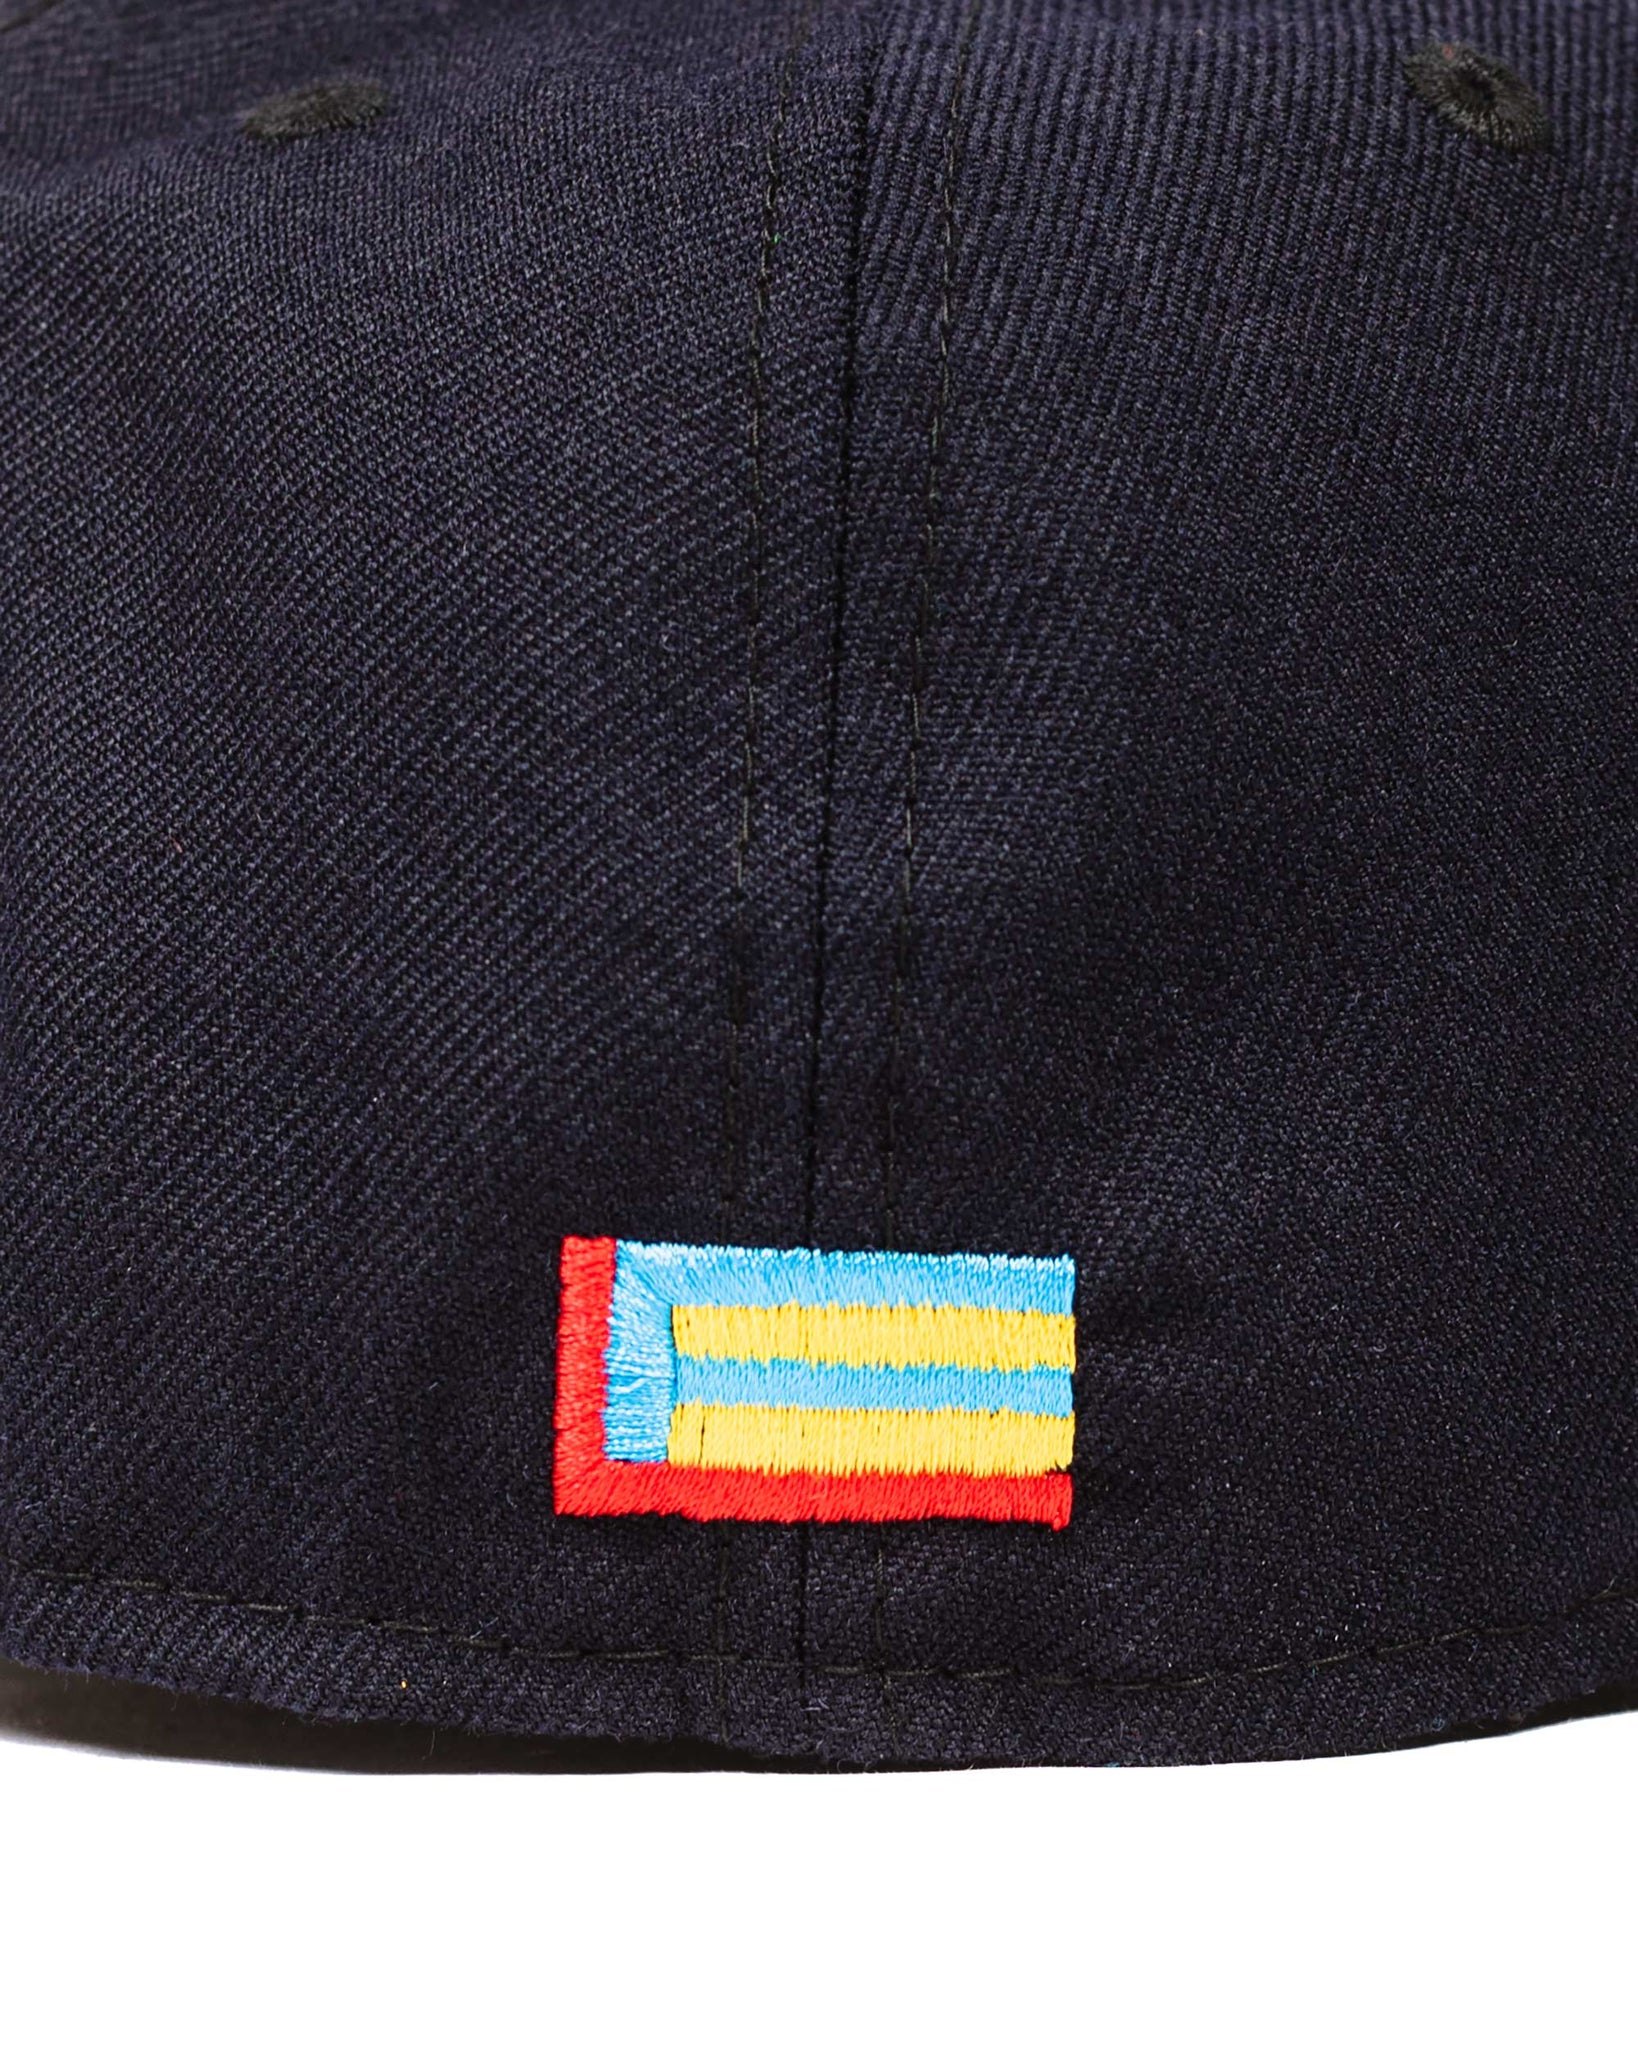 Lost & Found x New Era Low Profile 59FIFTY Cap Navy Back Logo